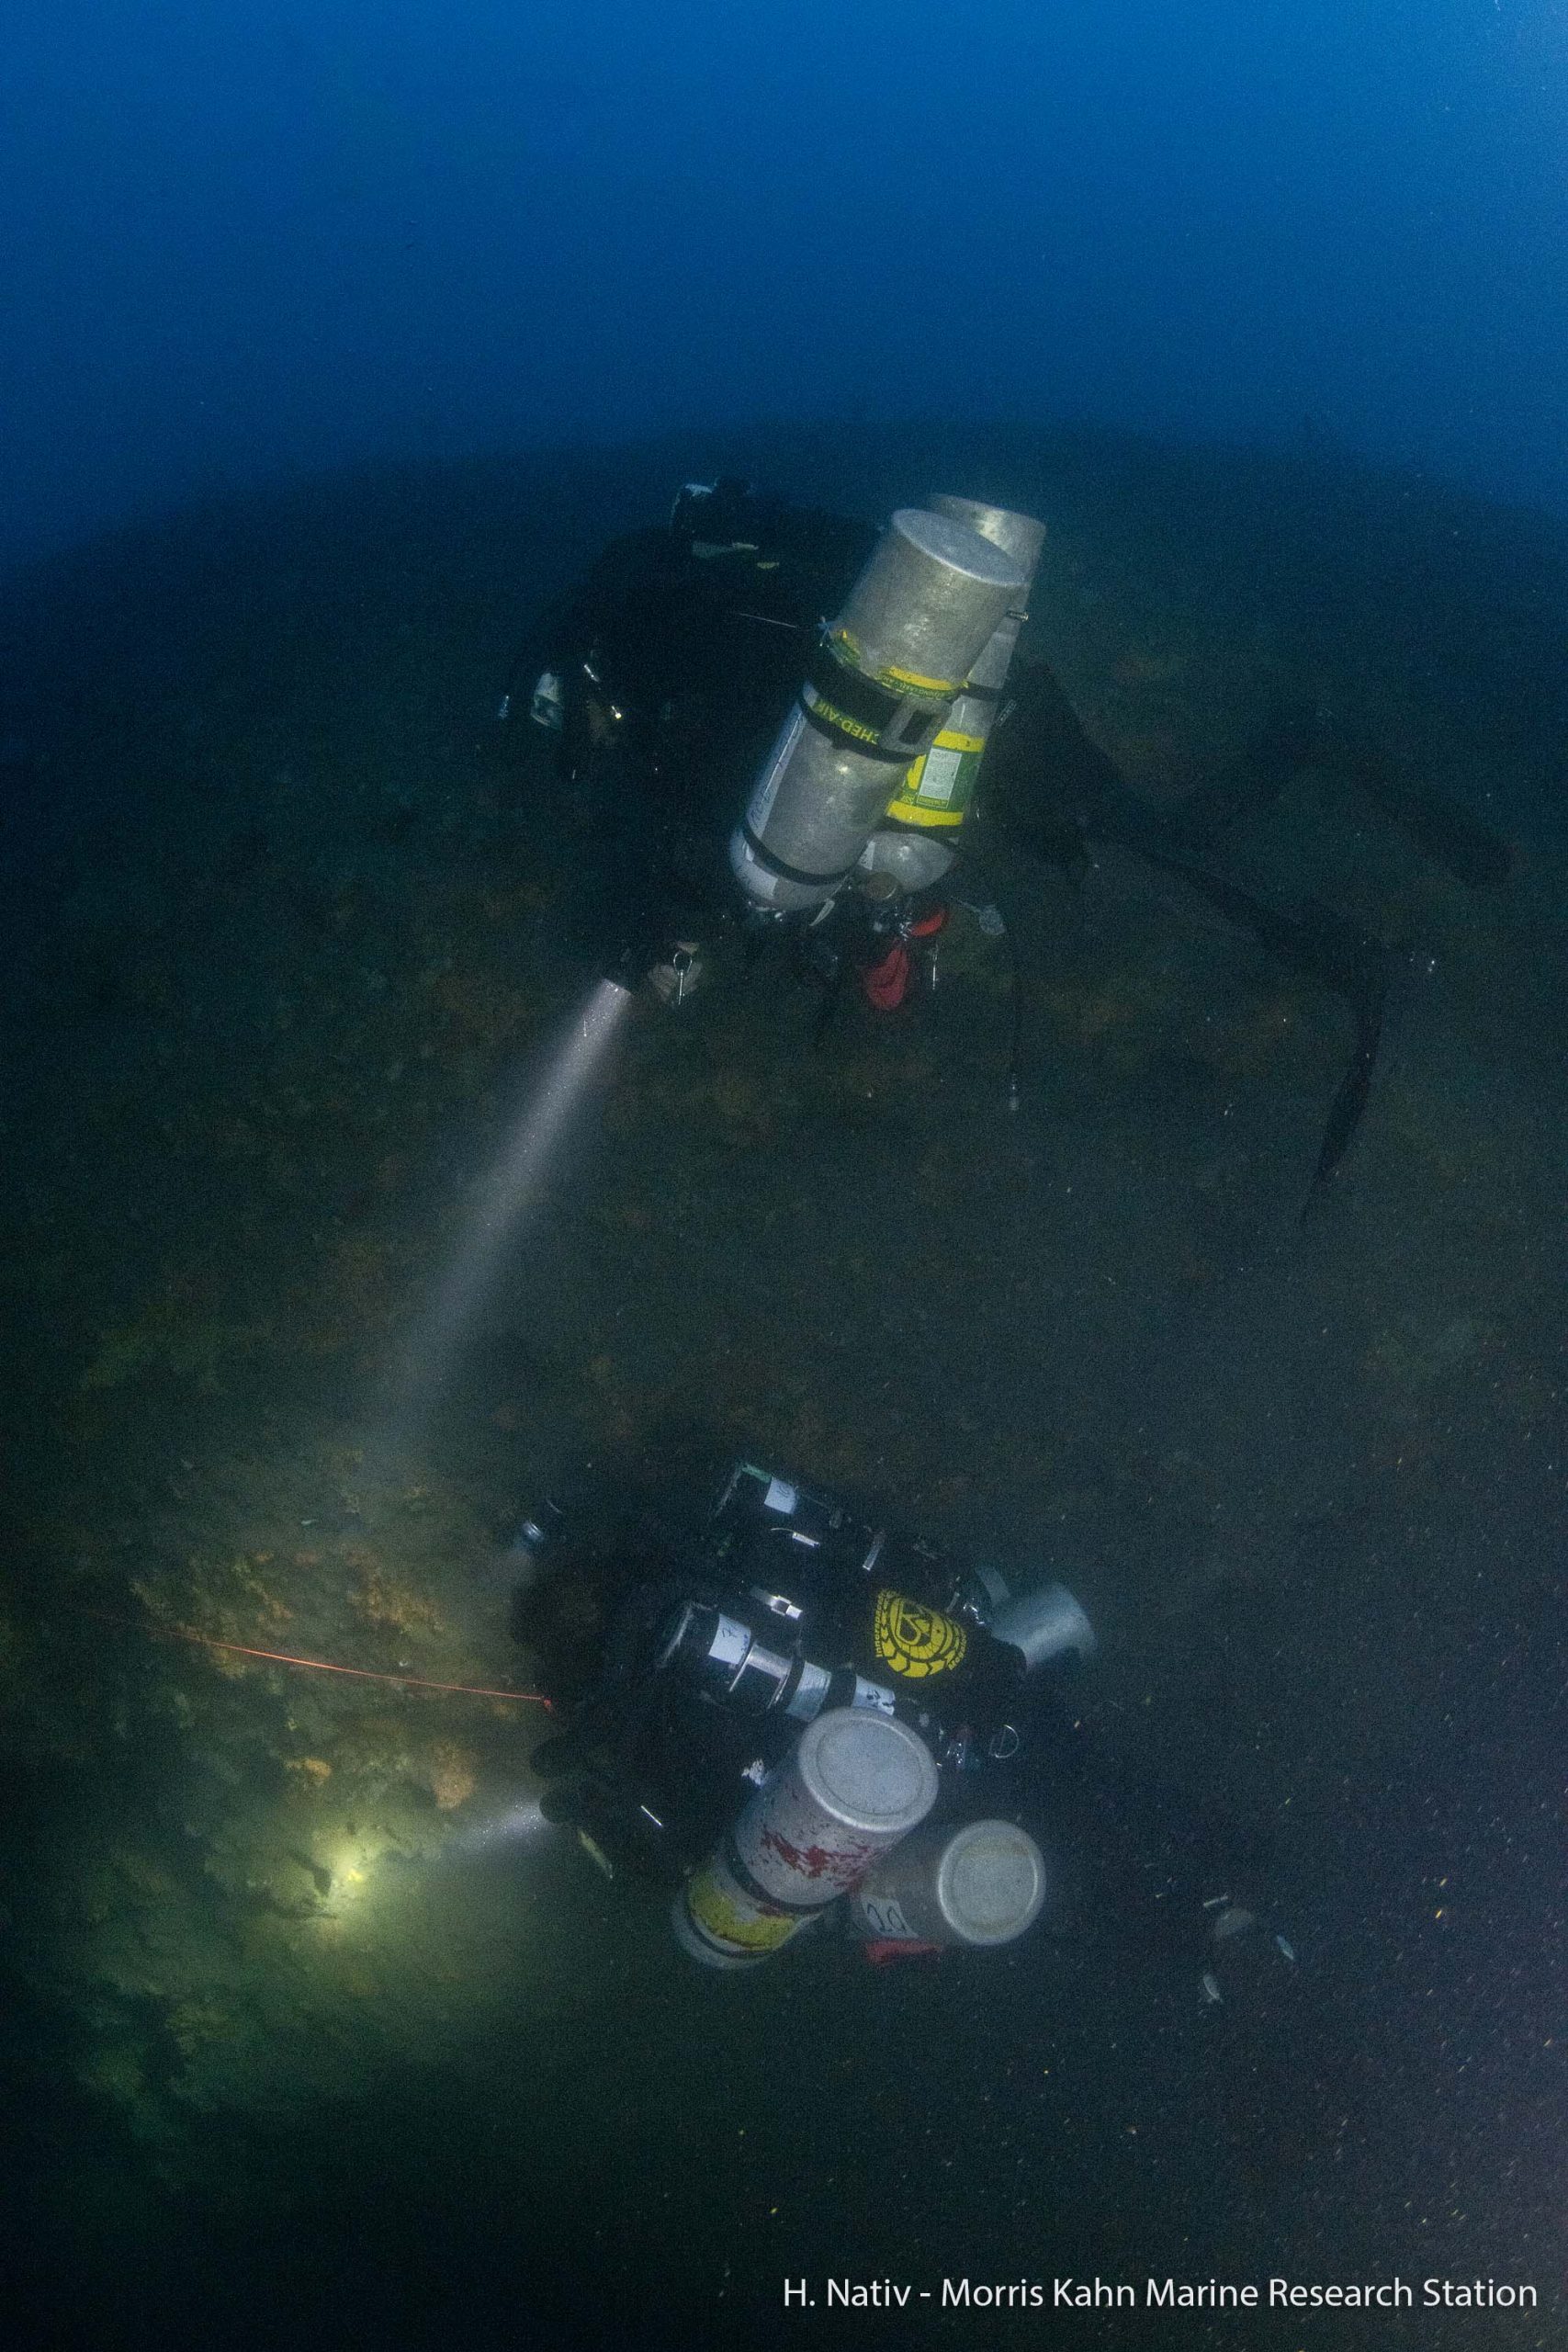  CCR Divers exploring the bottom of the EMS at 85 meter